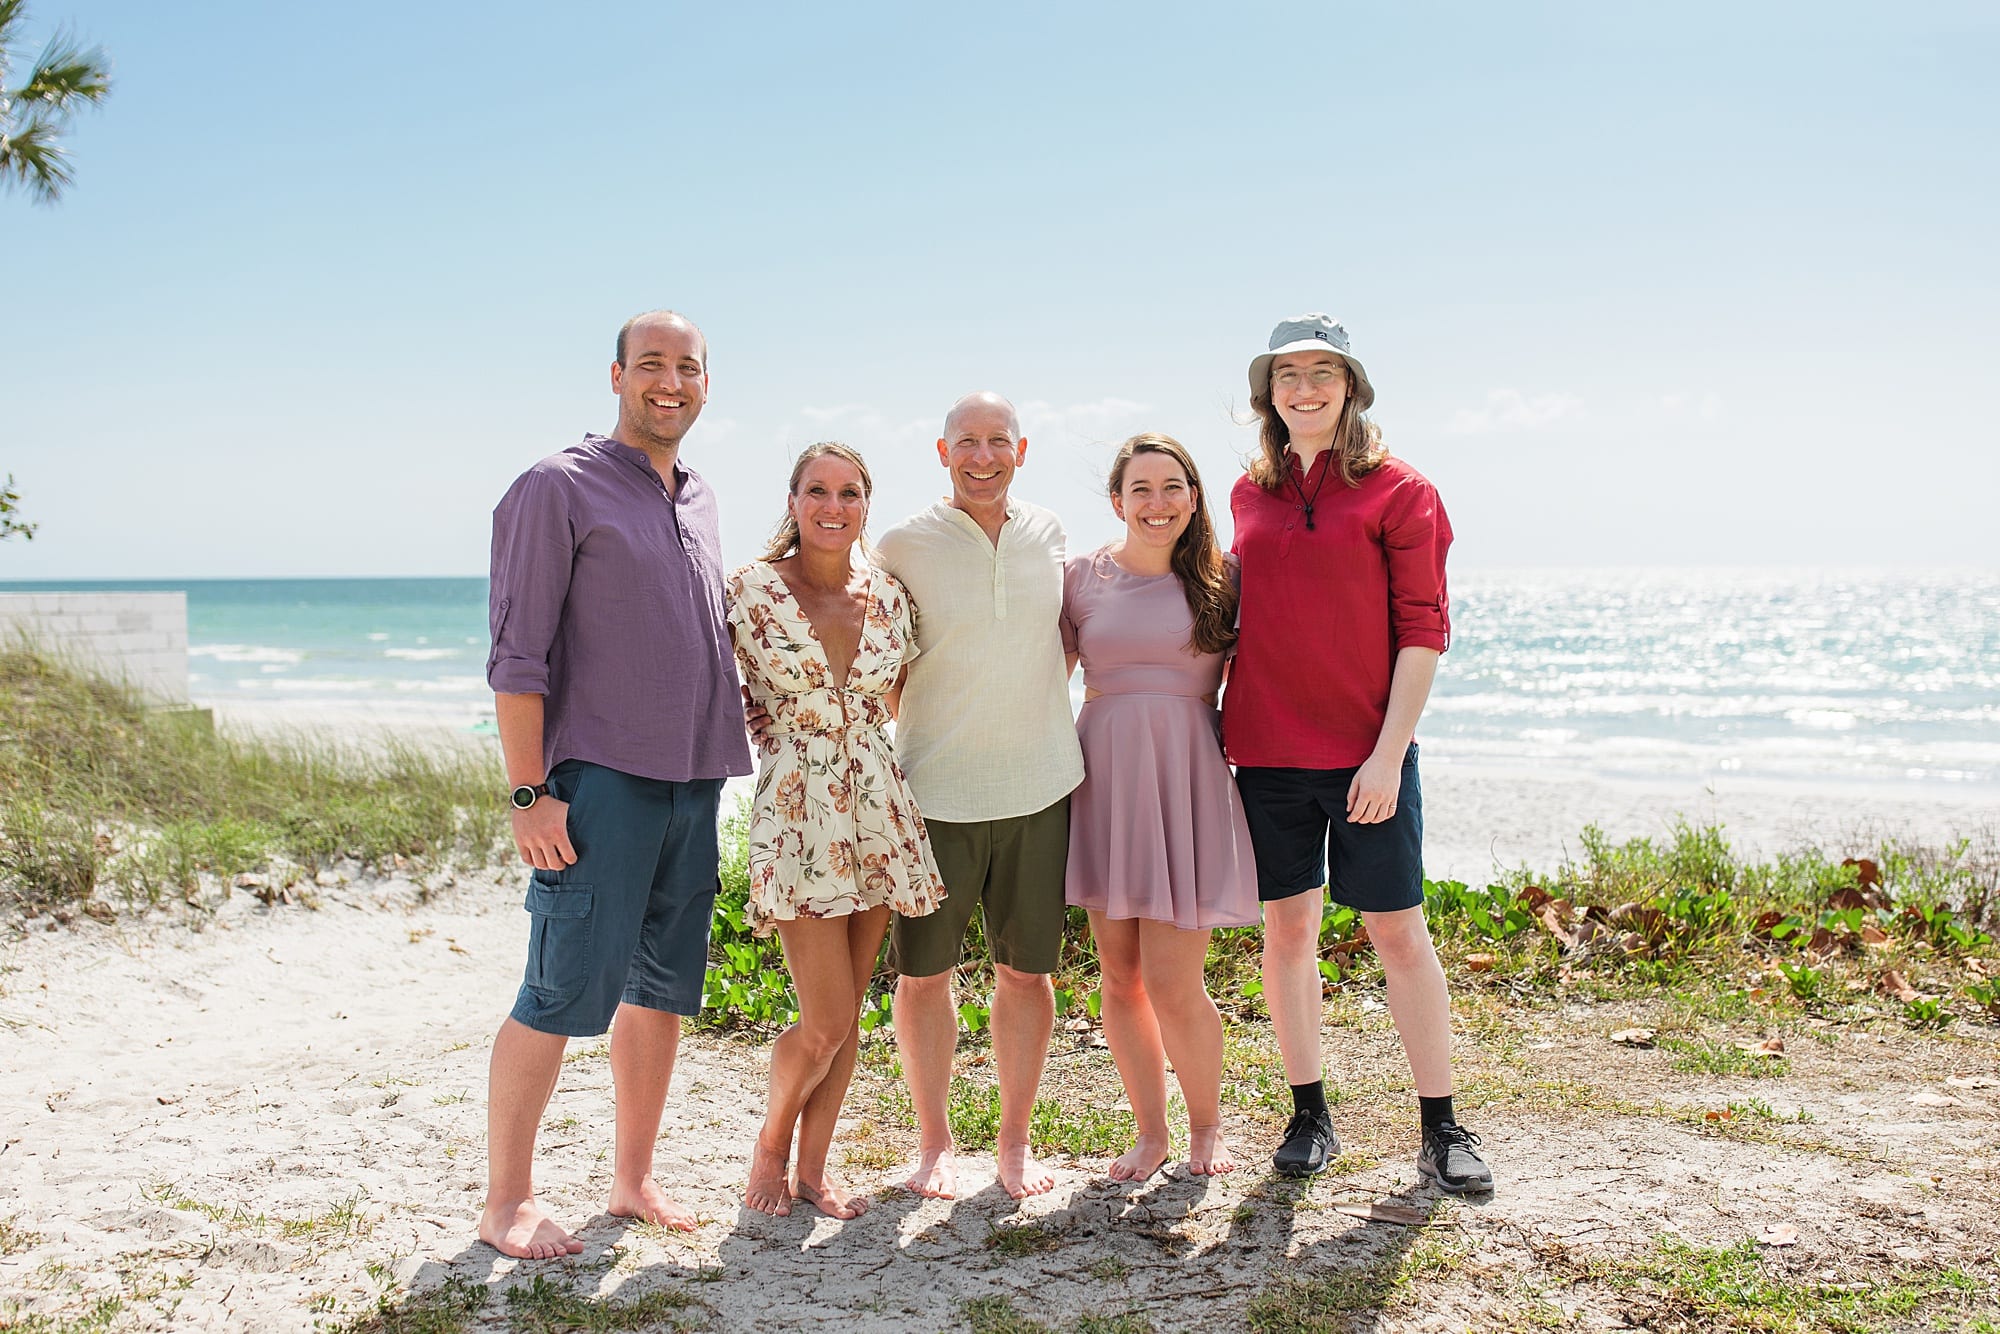 Adult Family of five smiling on the sandy beach with the blue ocean and sky behind them